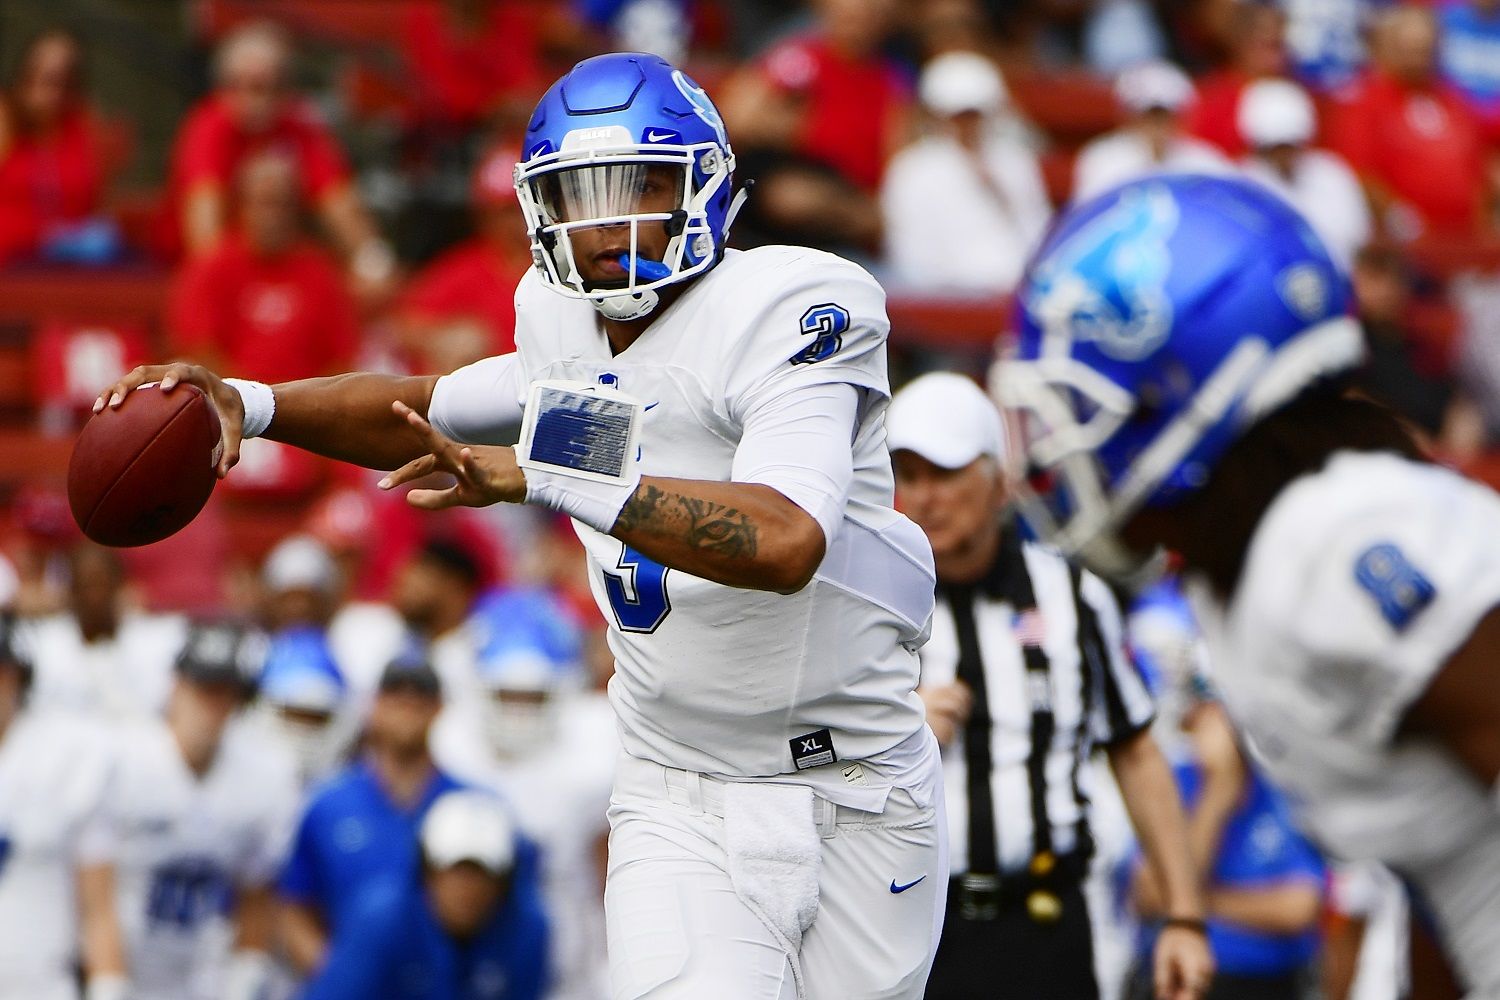 PISCATAWAY, NJ - SEPTEMBER 22: Tyree Jackson #3 of the Buffalo Bulls looks to pass against the Rutgers Scarlet Knights during the second quarter at HighPoint.com Stadium on September 22, 2018 in Piscataway, New Jersey. (Photo by Corey Perrine/Getty Images)